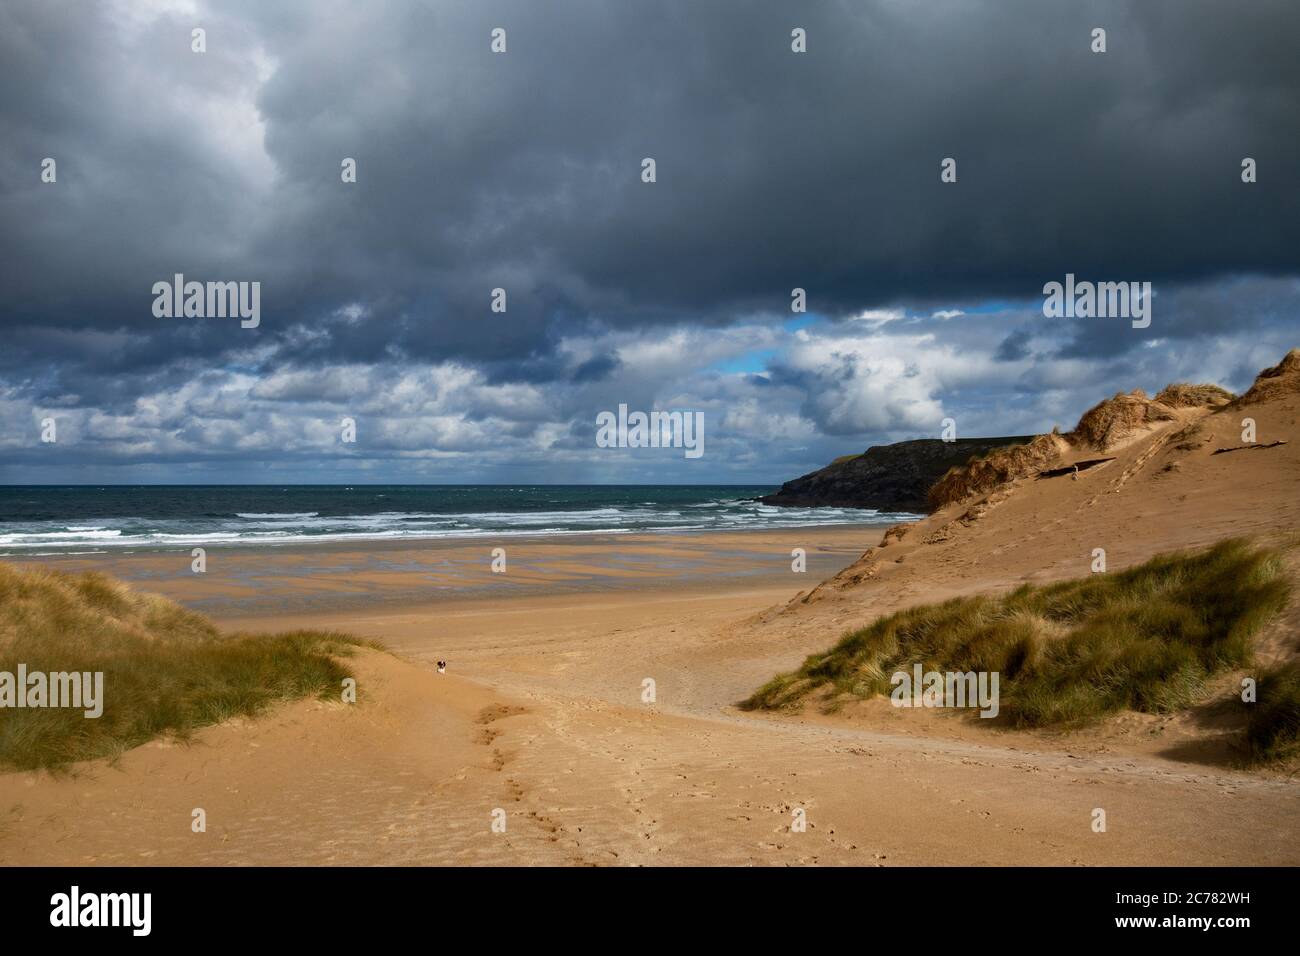 stormy sky over holywell bay near newquay in cornwall, england. Stock Photo